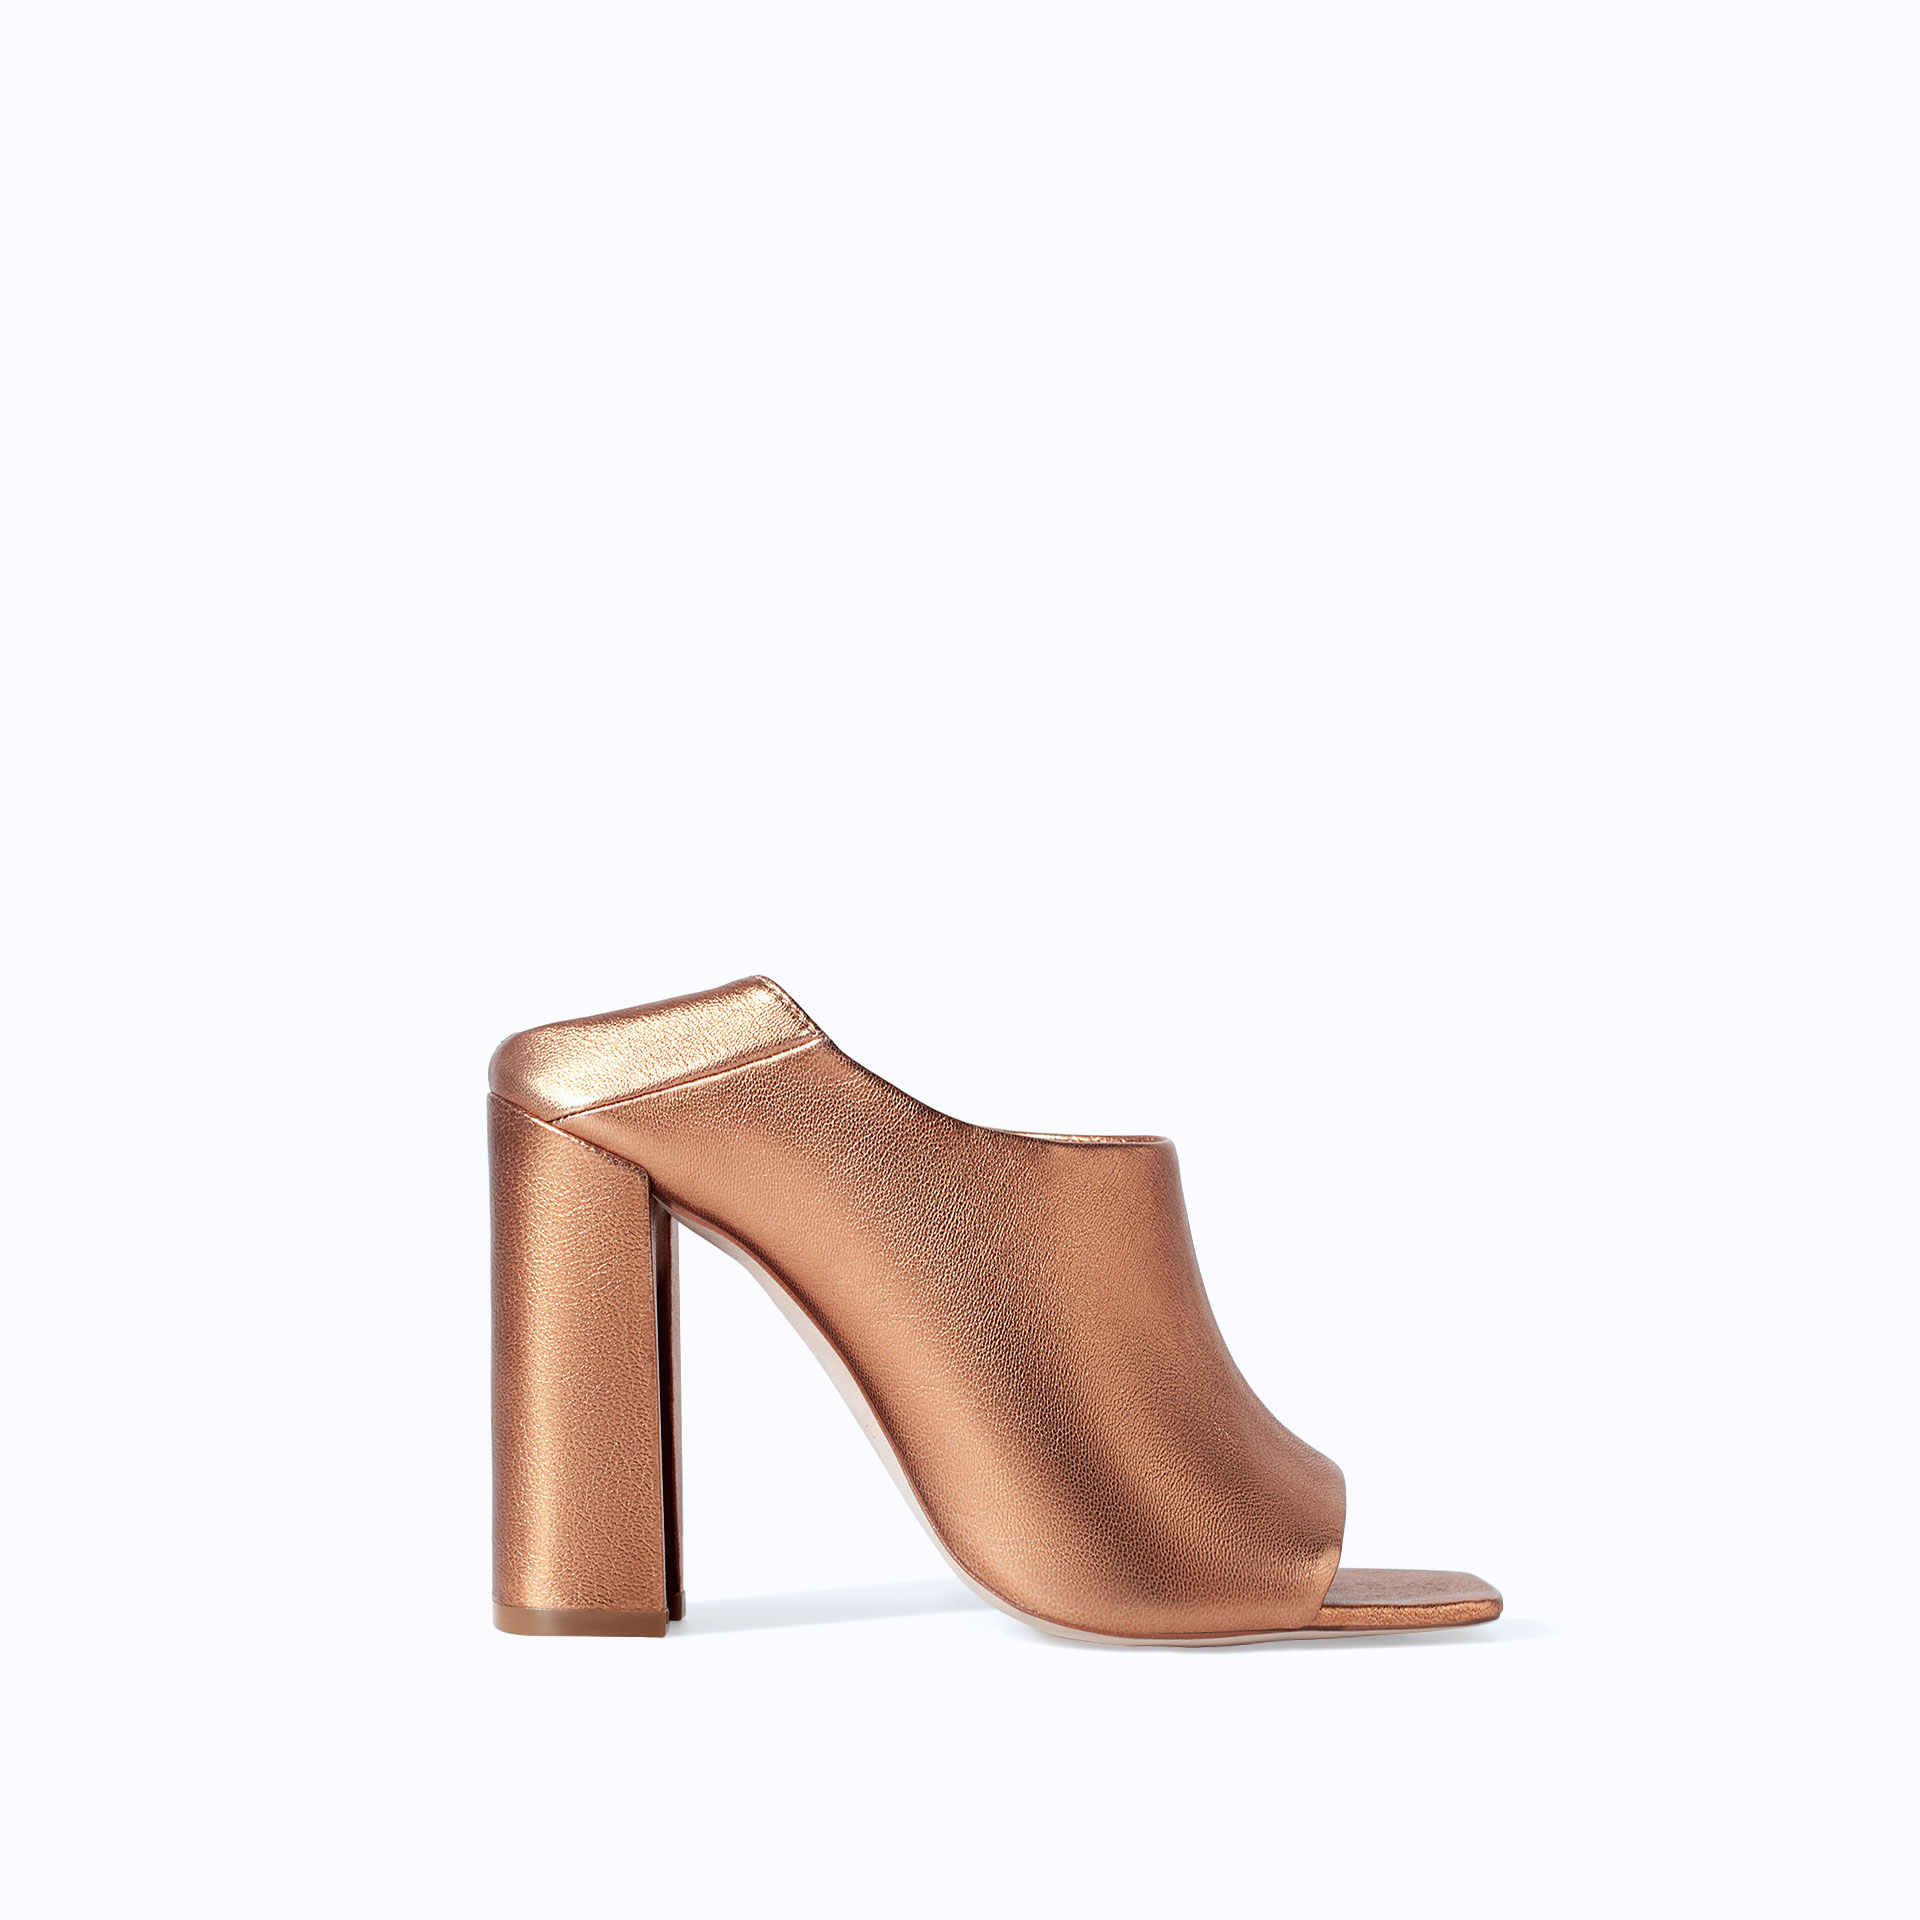 Zara Shiny Leather High Heel Mules in Gold | Lyst